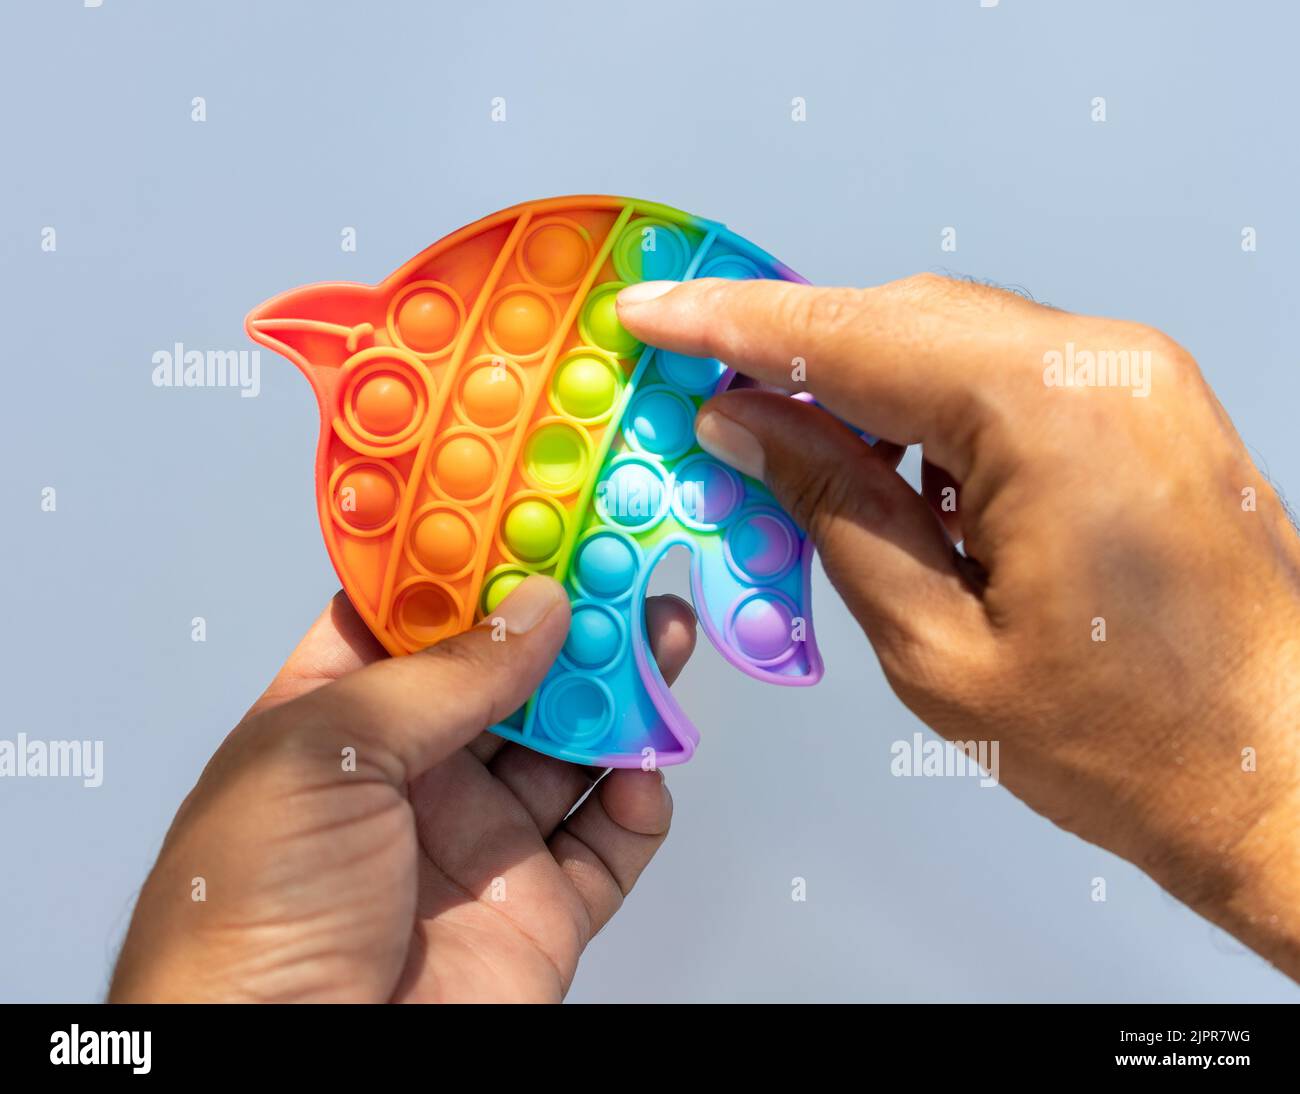 Holding in hand and playing anti stress pop it toy game Stock Photo